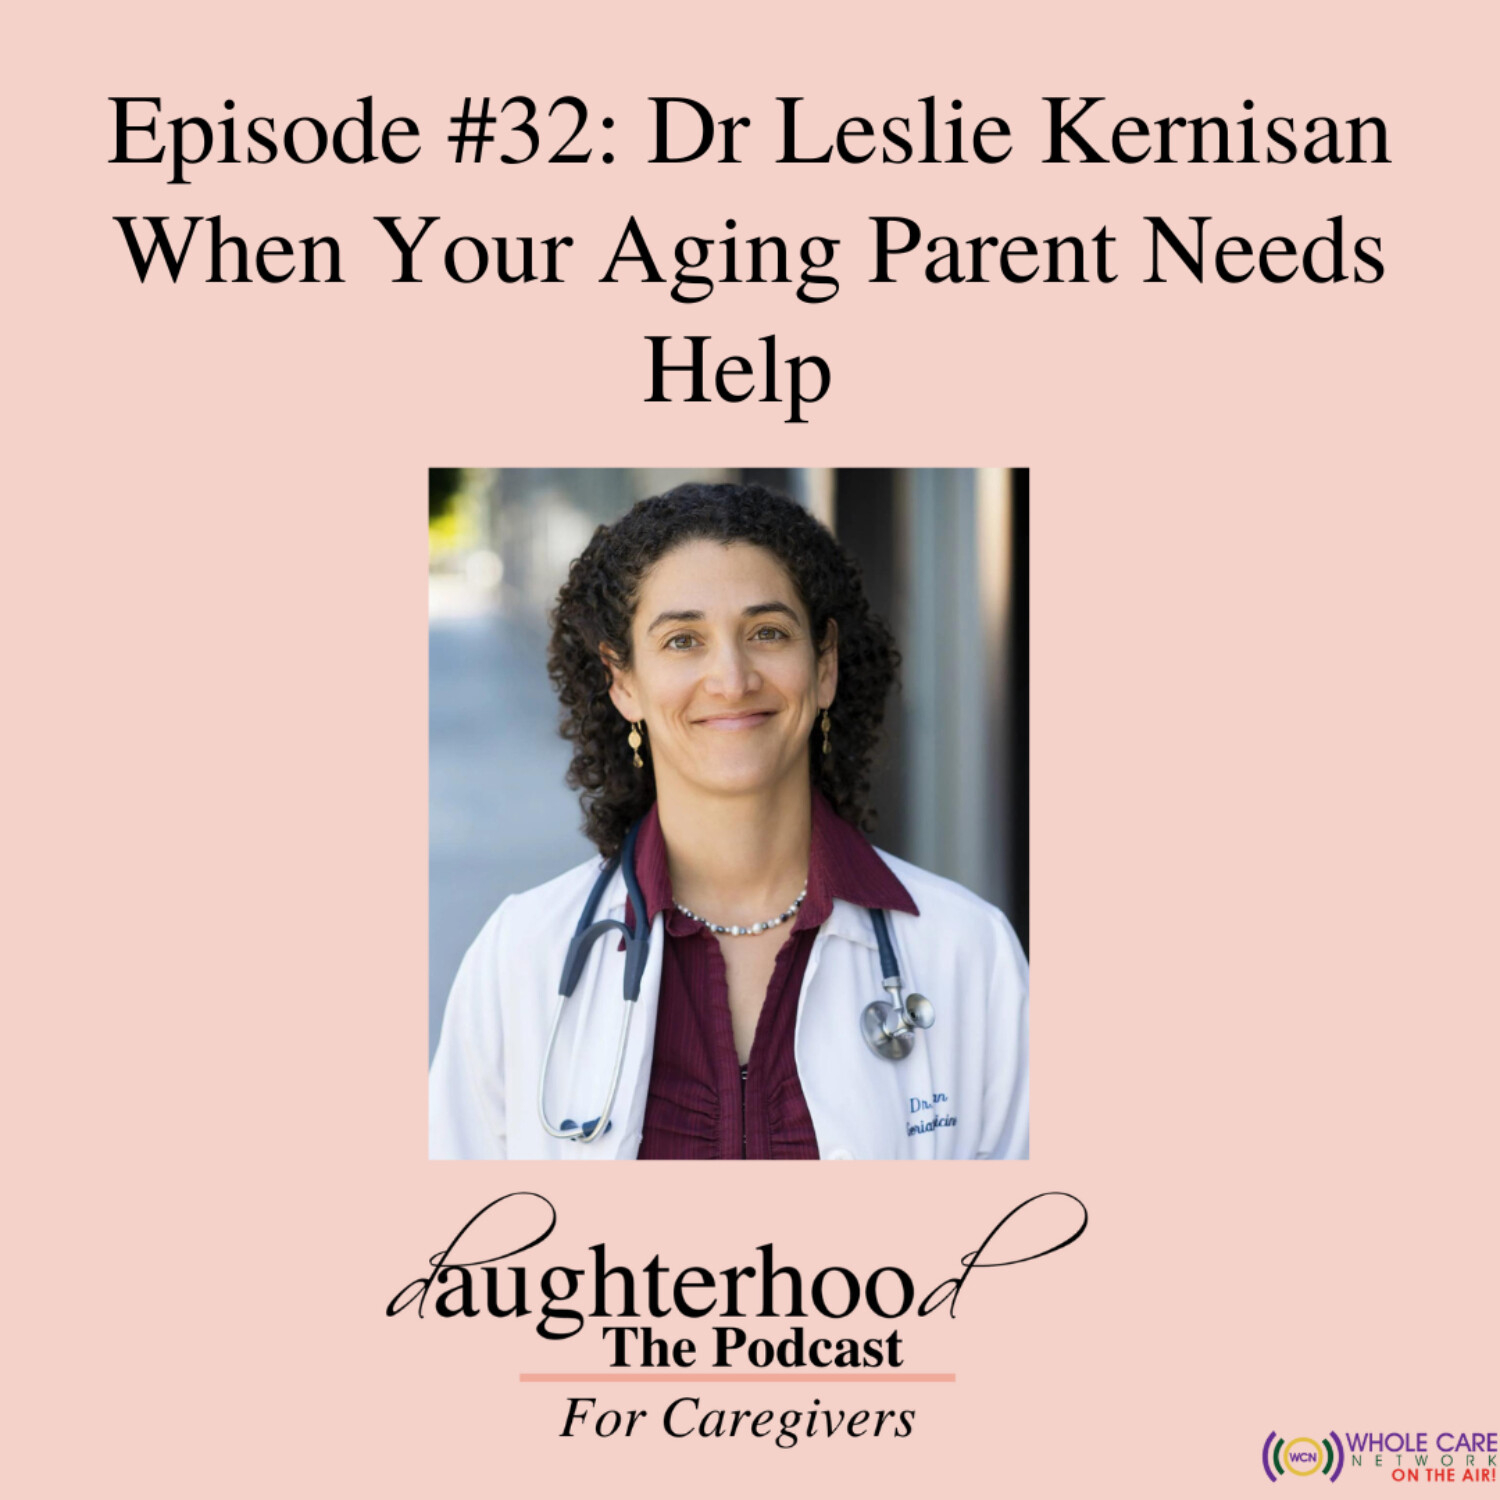 When Your Aging Parent Needs Help with Dr Leslie Kernisan